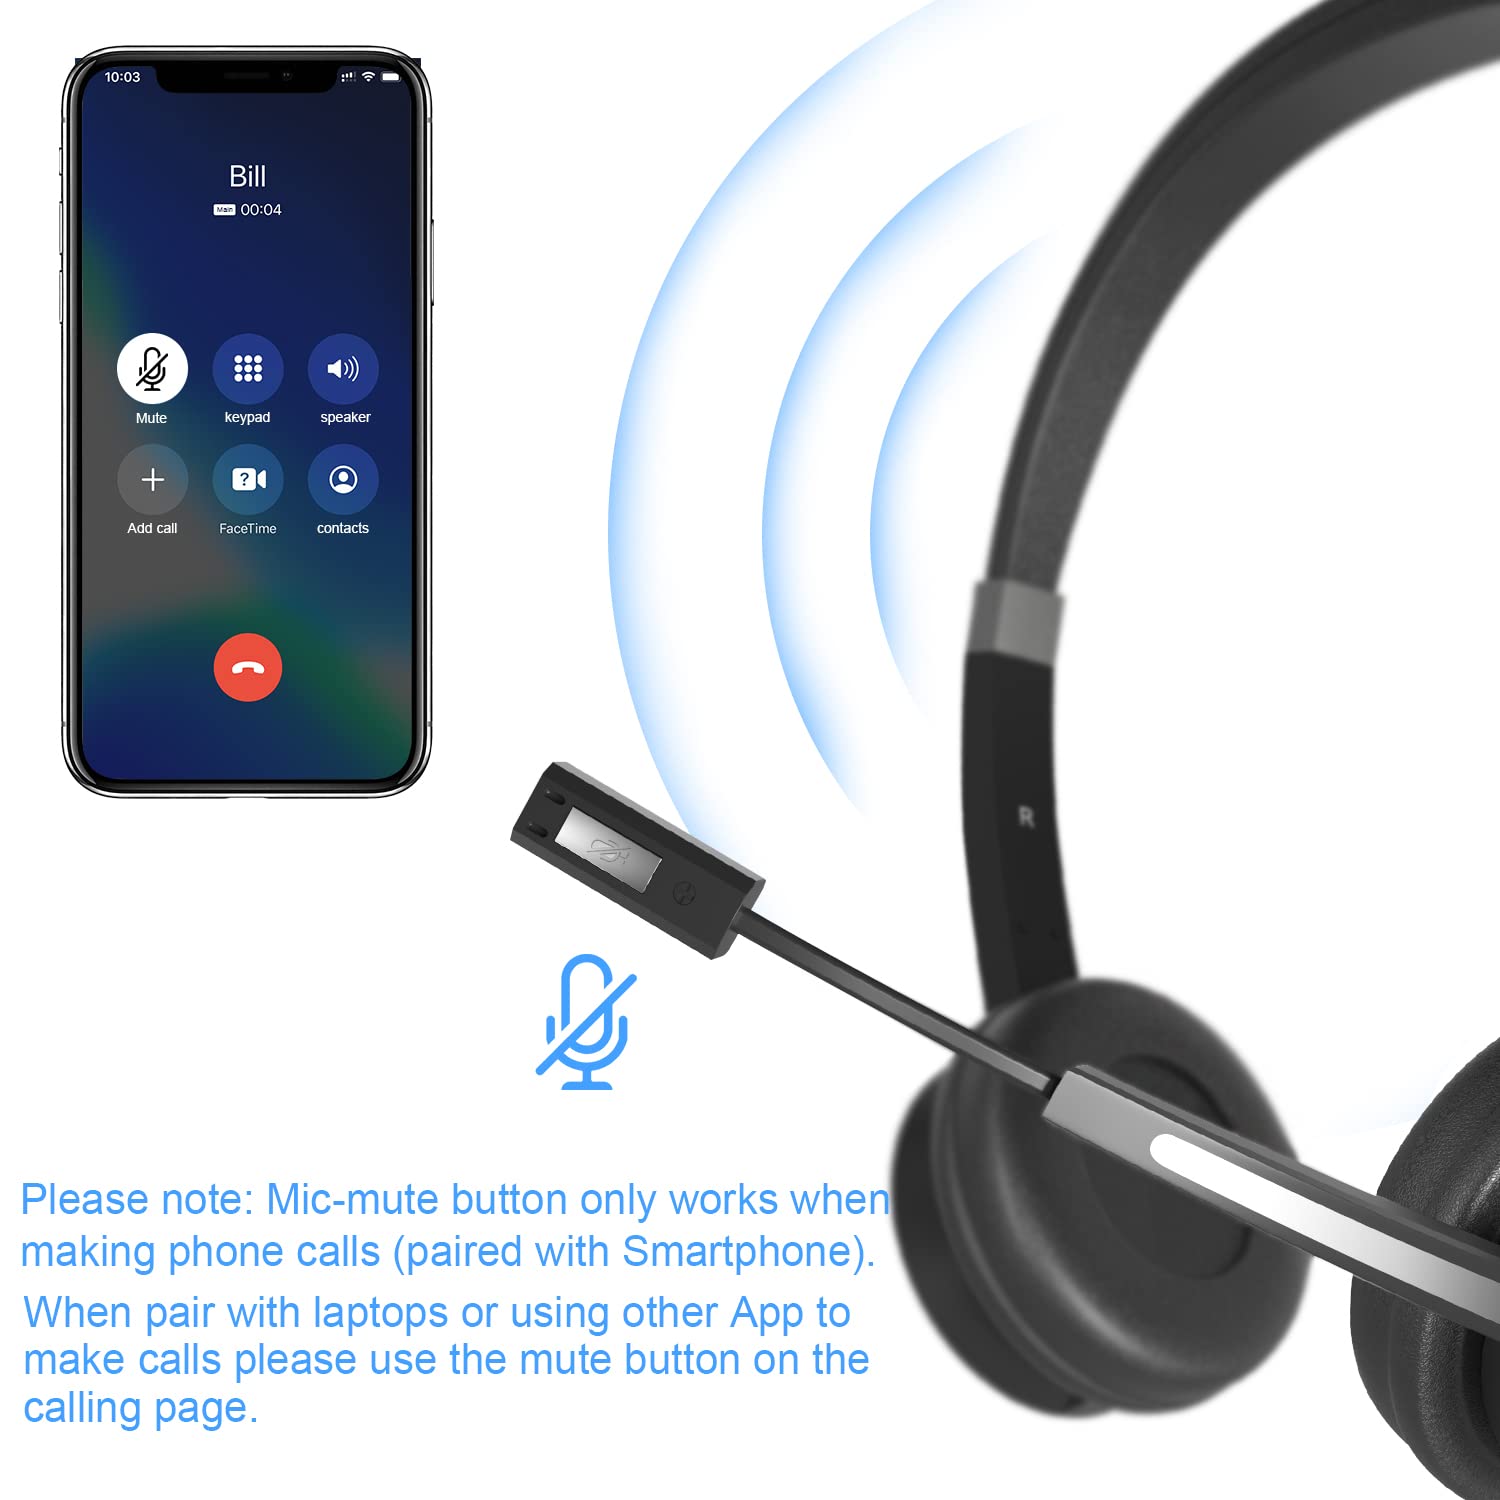 YUWAKAYI Bluetooth Headset with Noise Canceling Microphone, V5.0, Mic Mute, Wireless Handsfree Headphone for Laptop, Cell Phone, Tablet, Call Center, Office, Meeting,Online Class